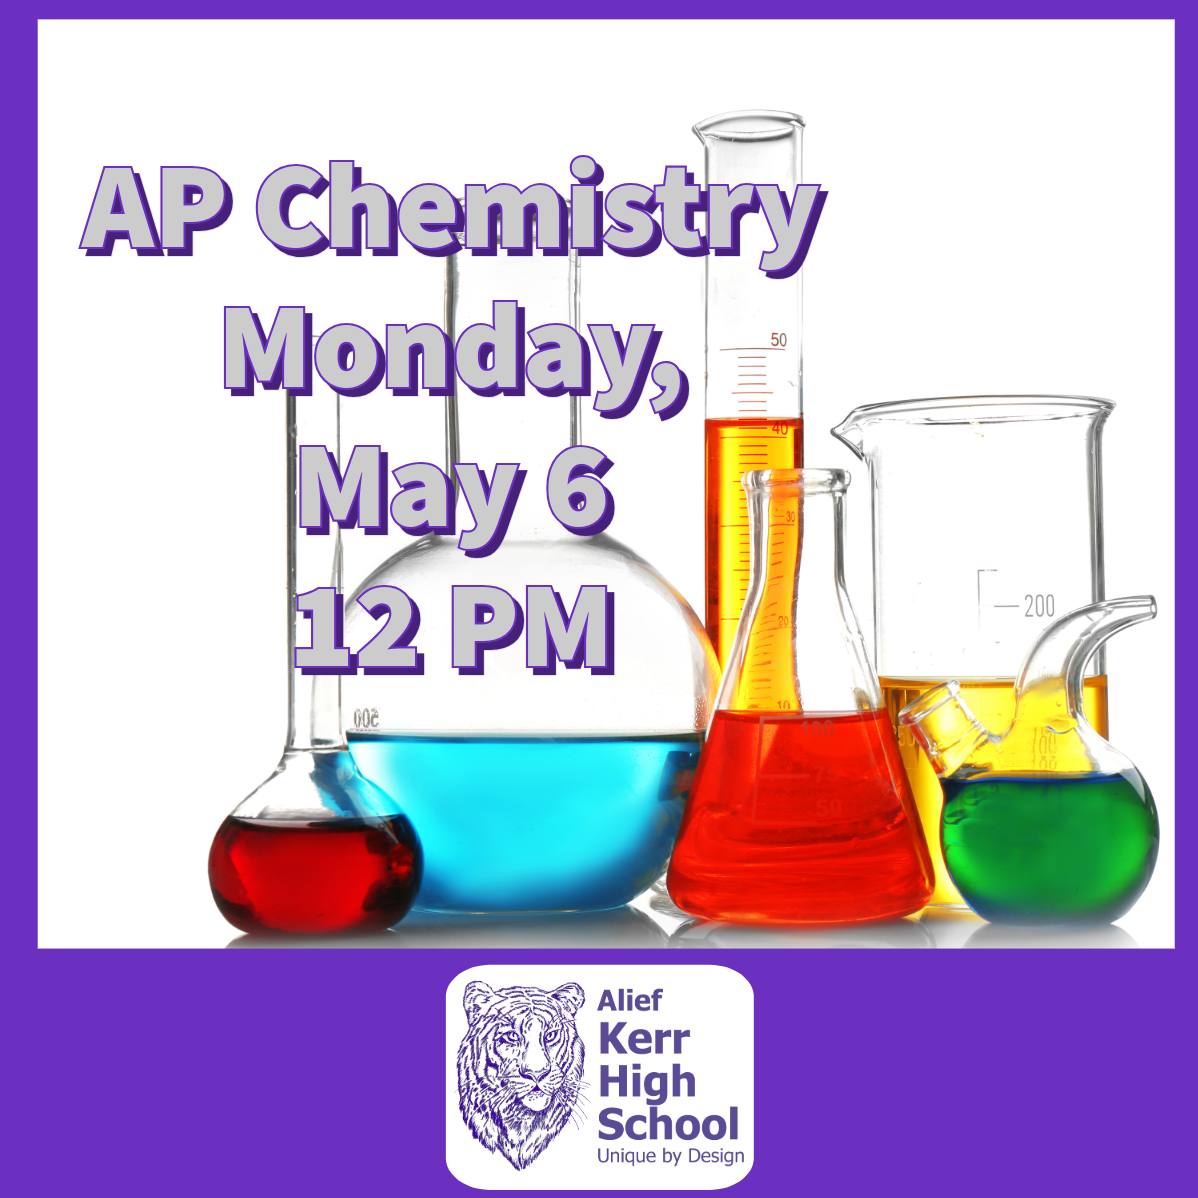 AP Chemistry students will be testing their knowlege on Monday, May 6, starting at 12 PM. #makeafive #kerrturns30